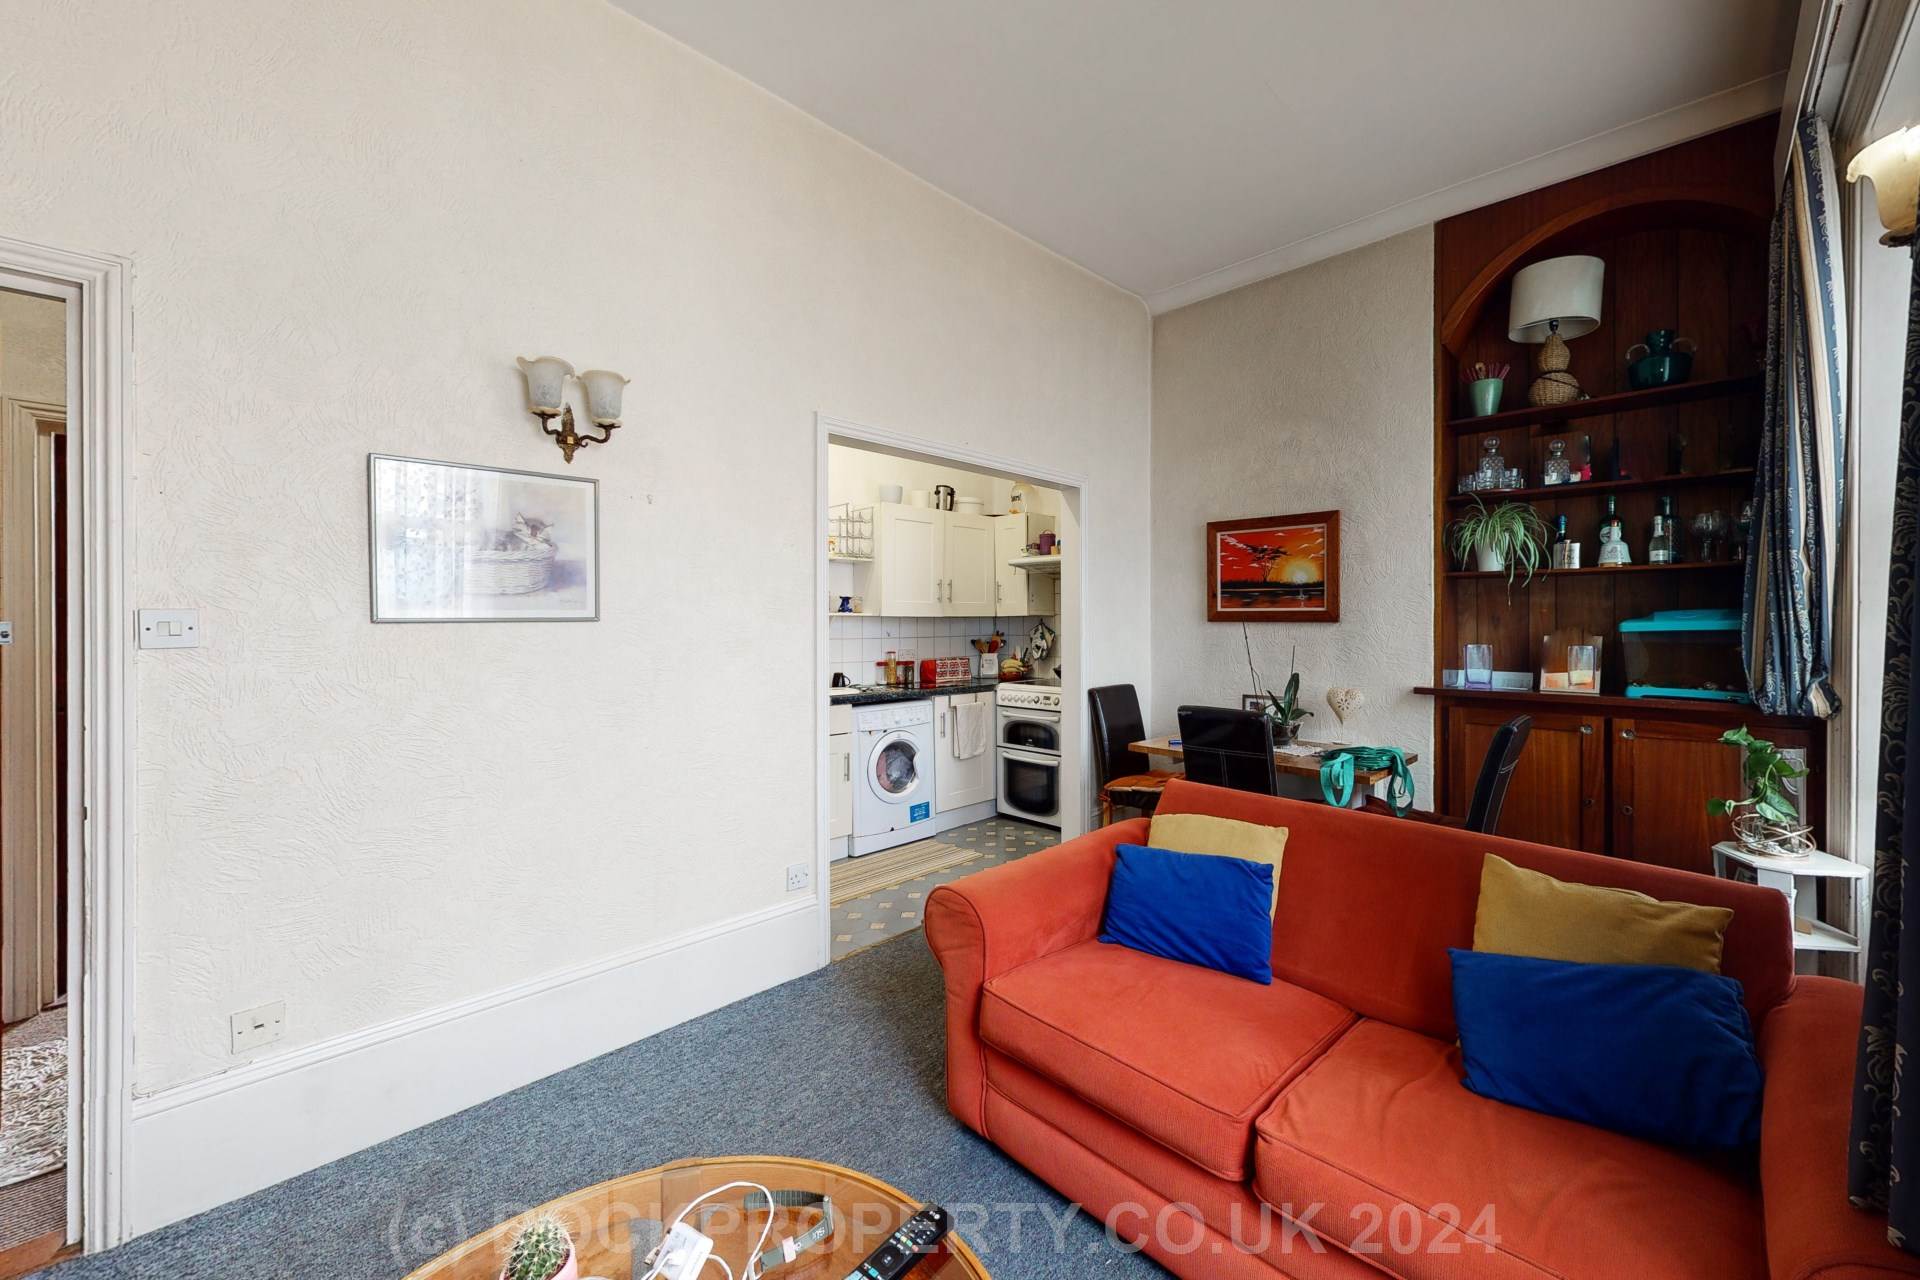 GROUND FLOOR 1 BED, St Saviours Road, St Helier, Image 6